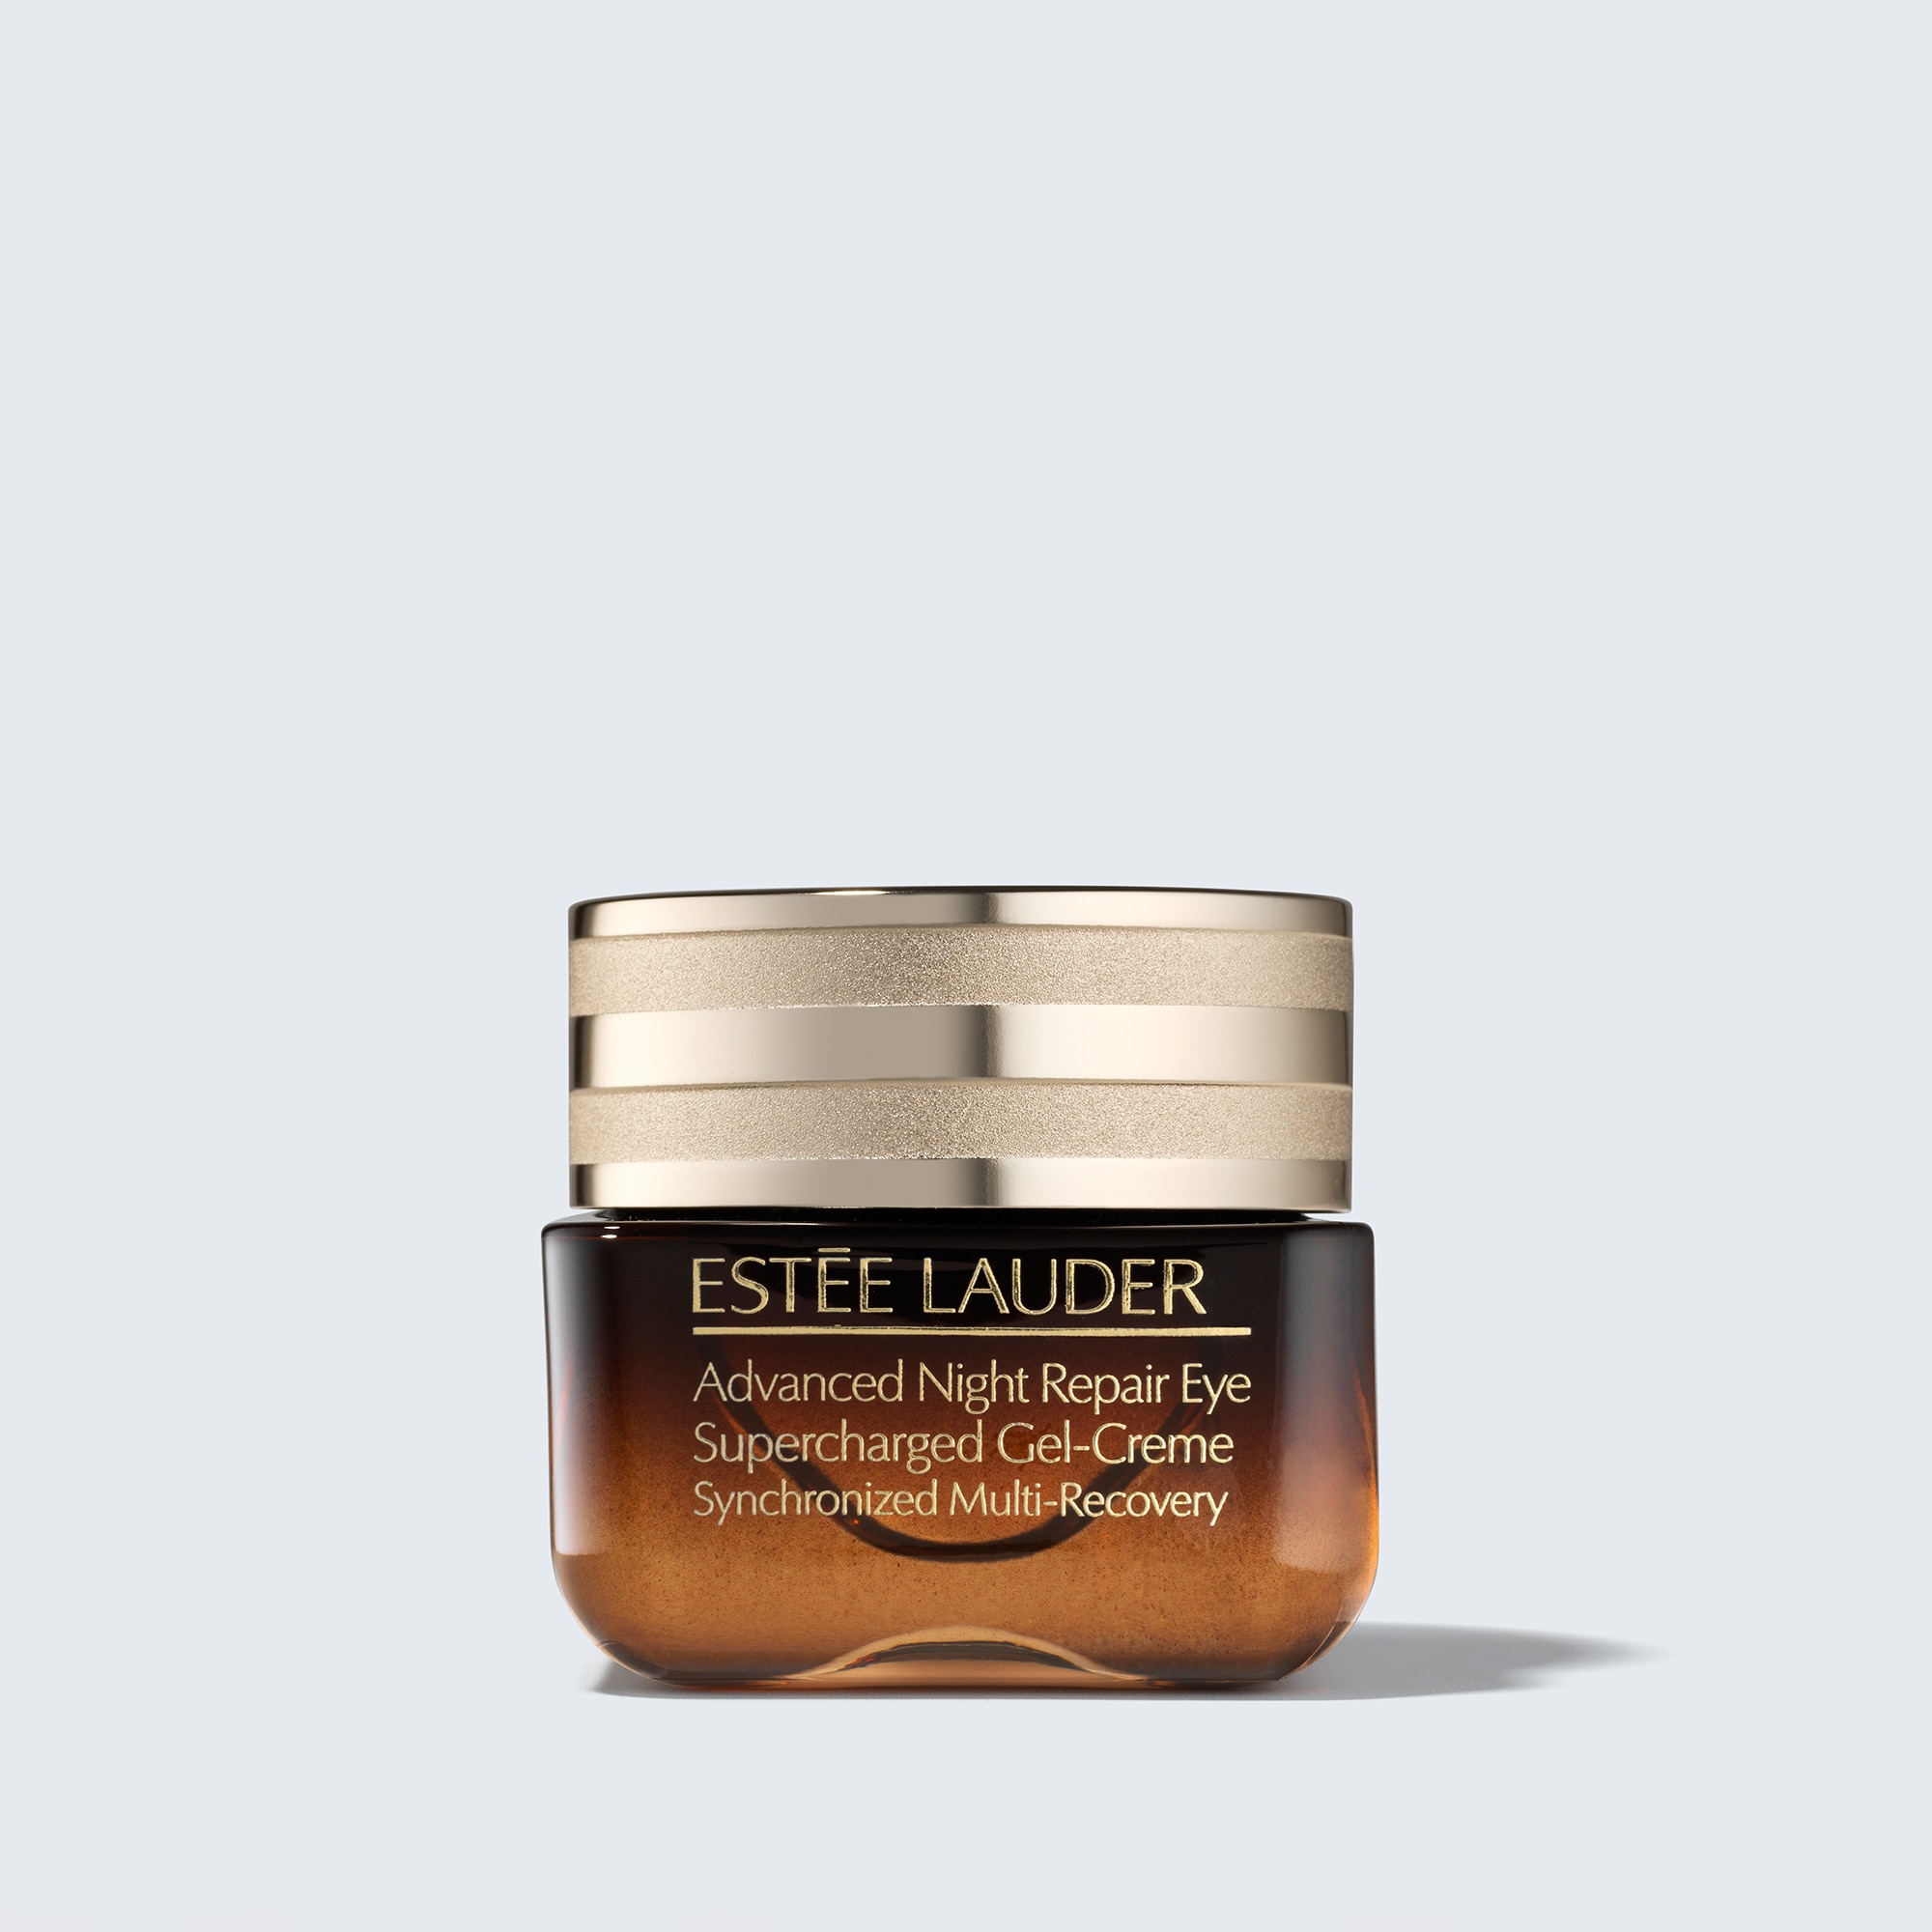 EstÃ©e Lauder Advance Night Repair Eye Supercharged Gel-Creme Synchronized Recovery - Duluxe Sample Size: 5ml